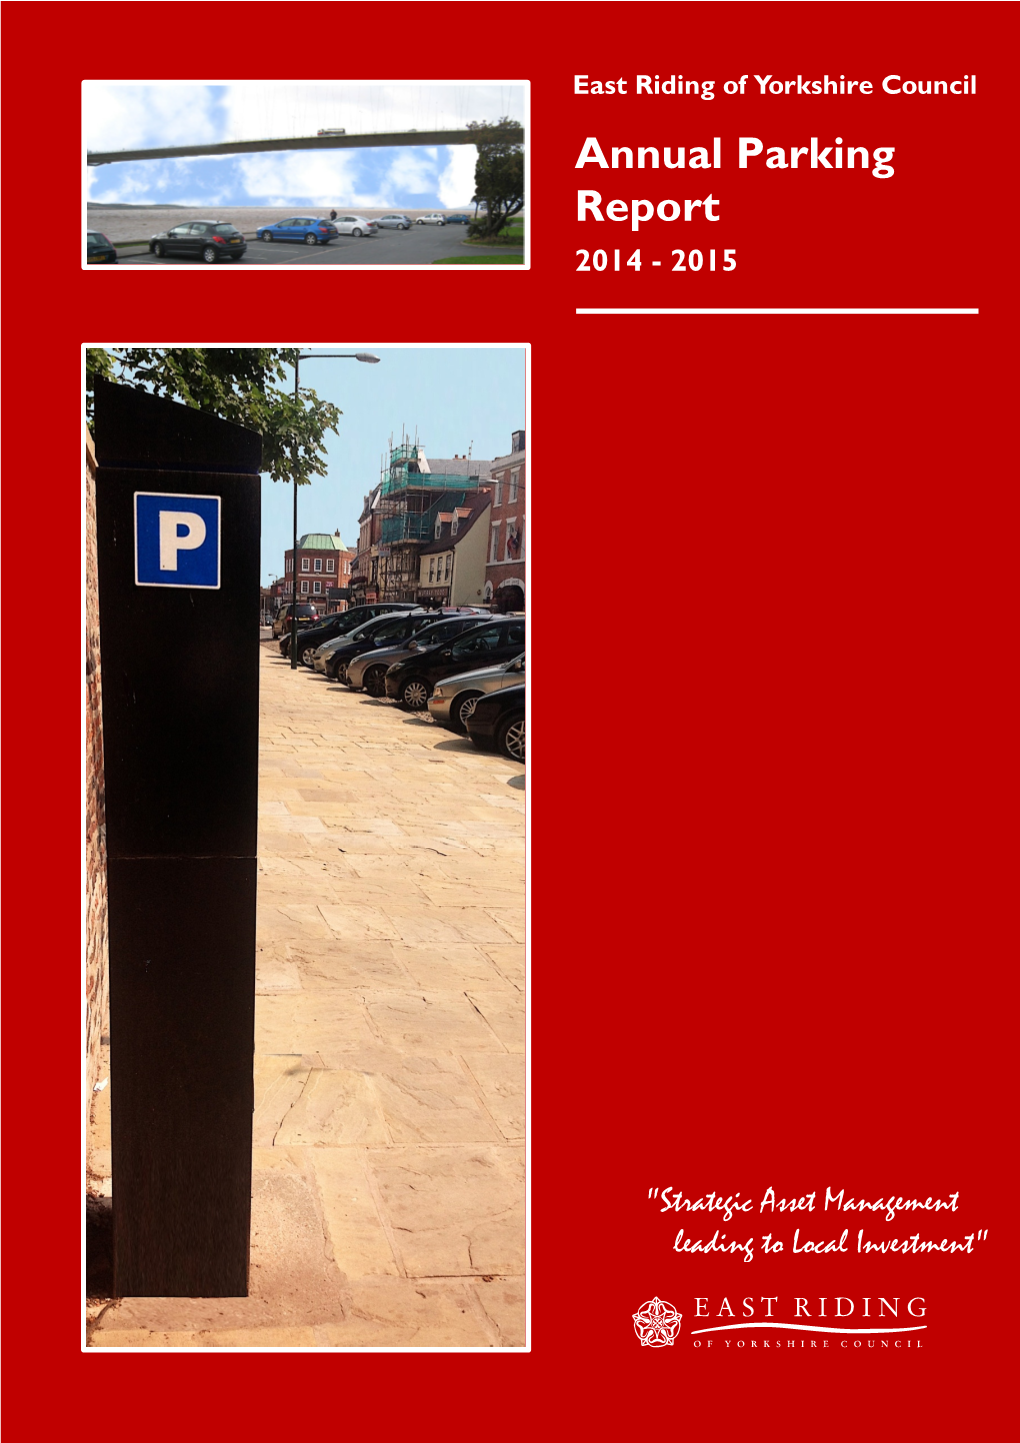 Annual Parking Report 2014-2015